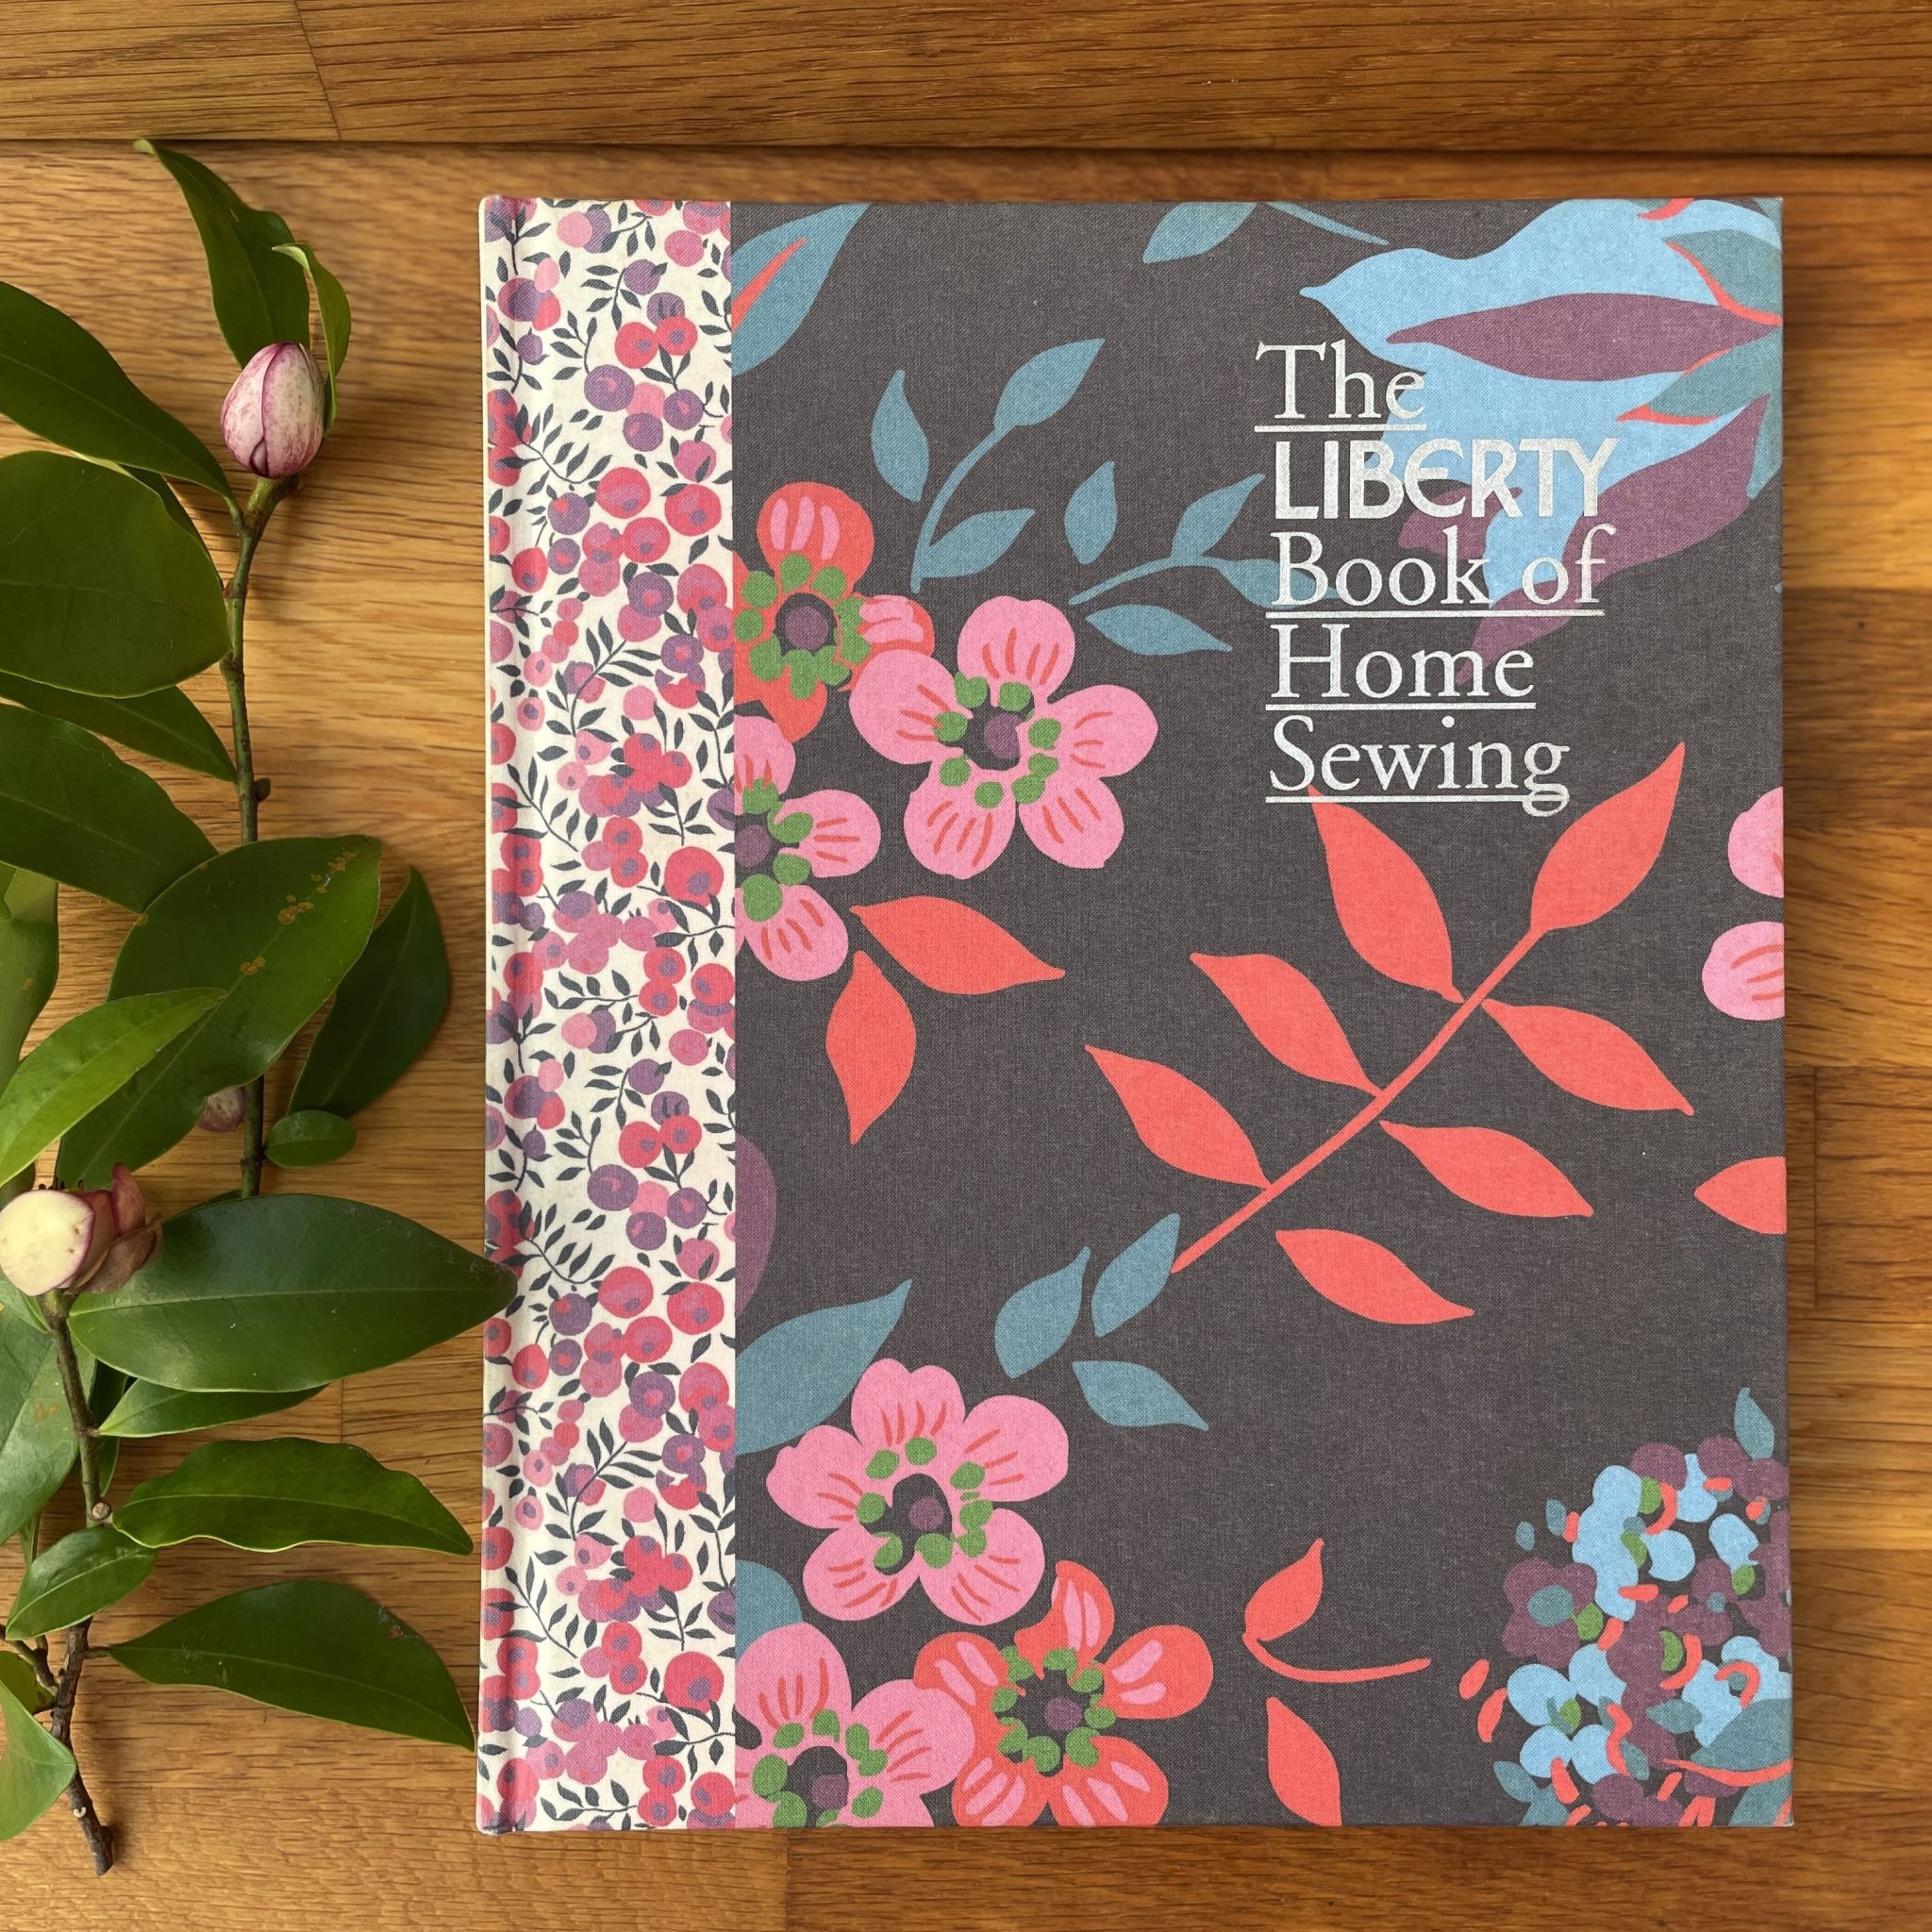 The　Sewing　Liberty　Book　of　Home